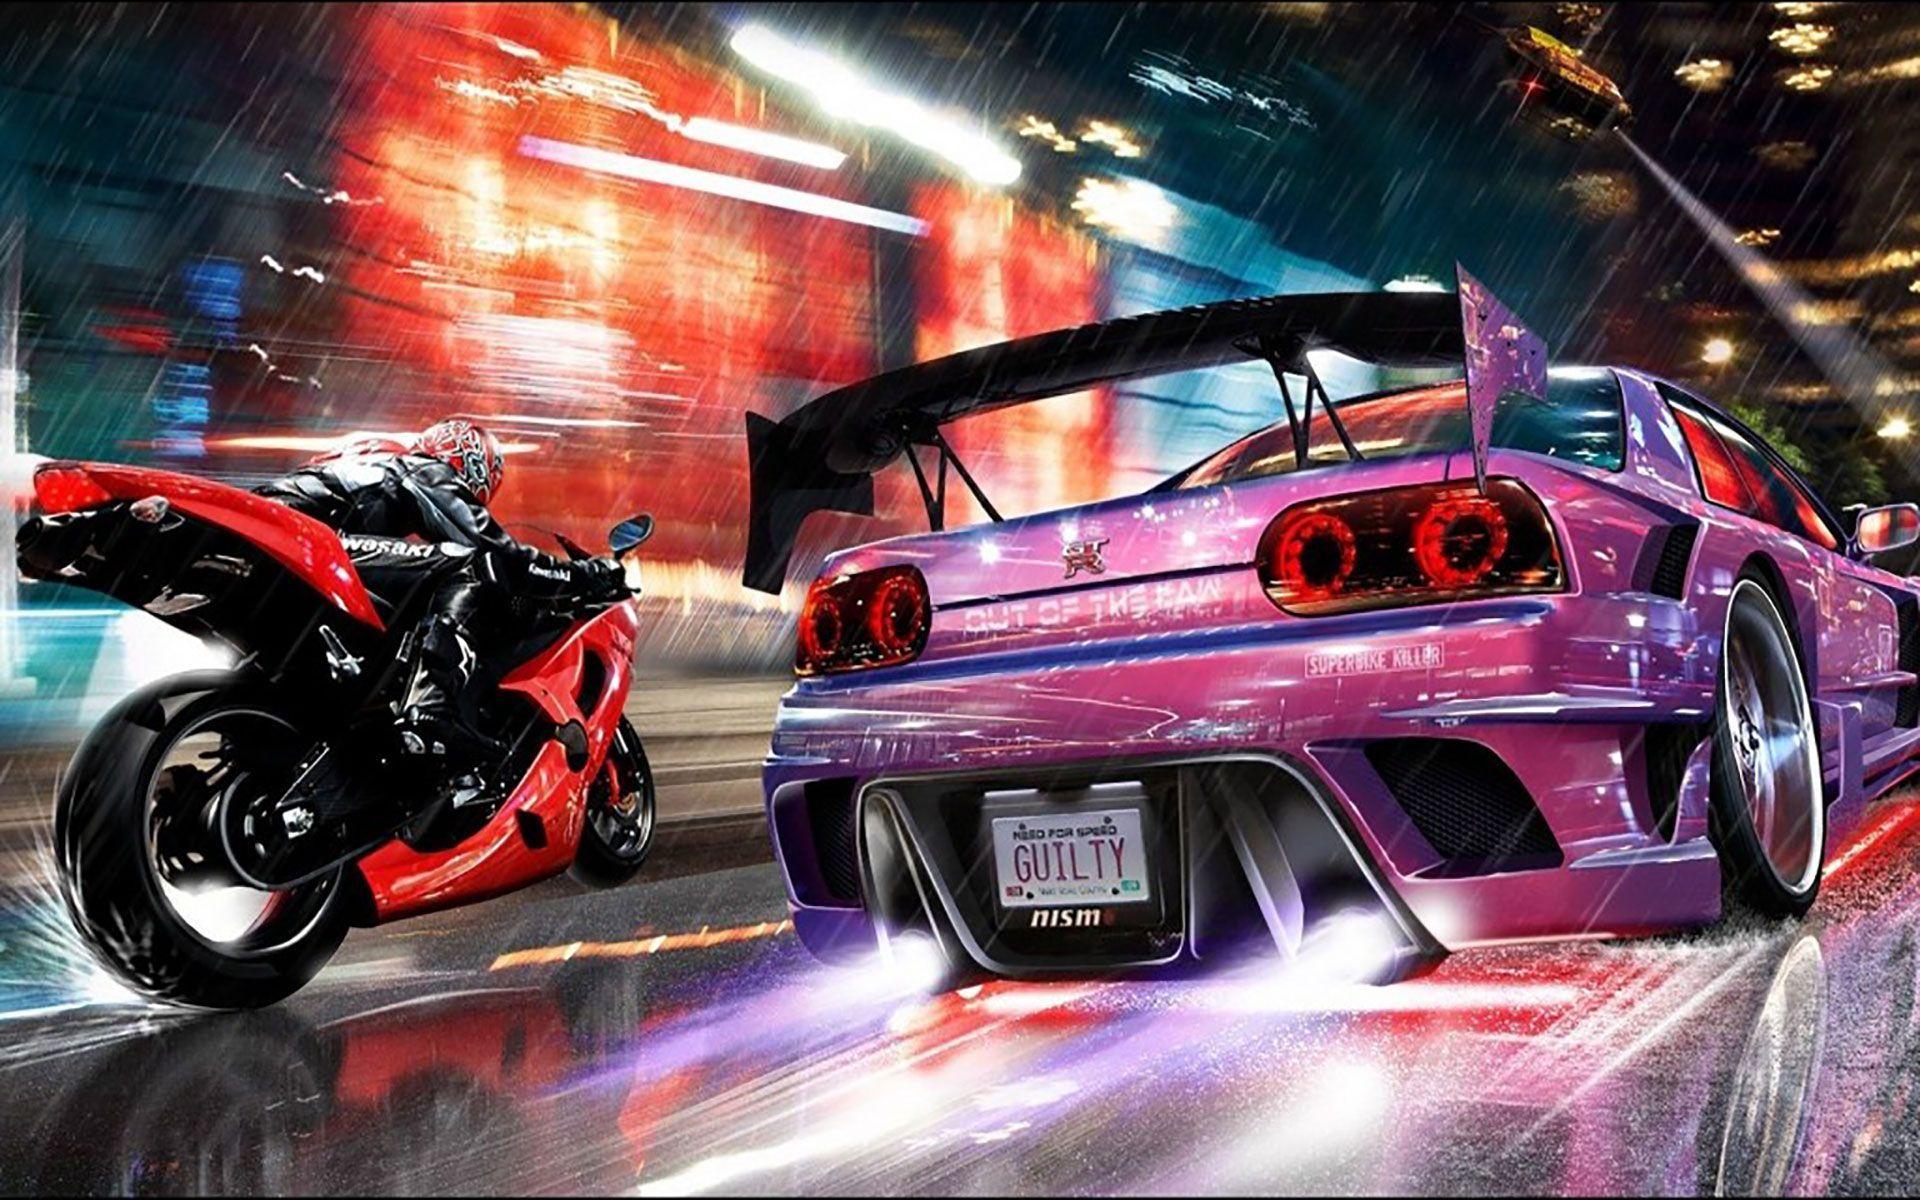 Featured image of post 3D Hd Wallpaper Car And Bike : About androidhdwallpapers.com we offer you cool android wallpapers in hd and cool android backgrounds completely free, thousands of carefully selected high quality wallpapers for all kinds of.